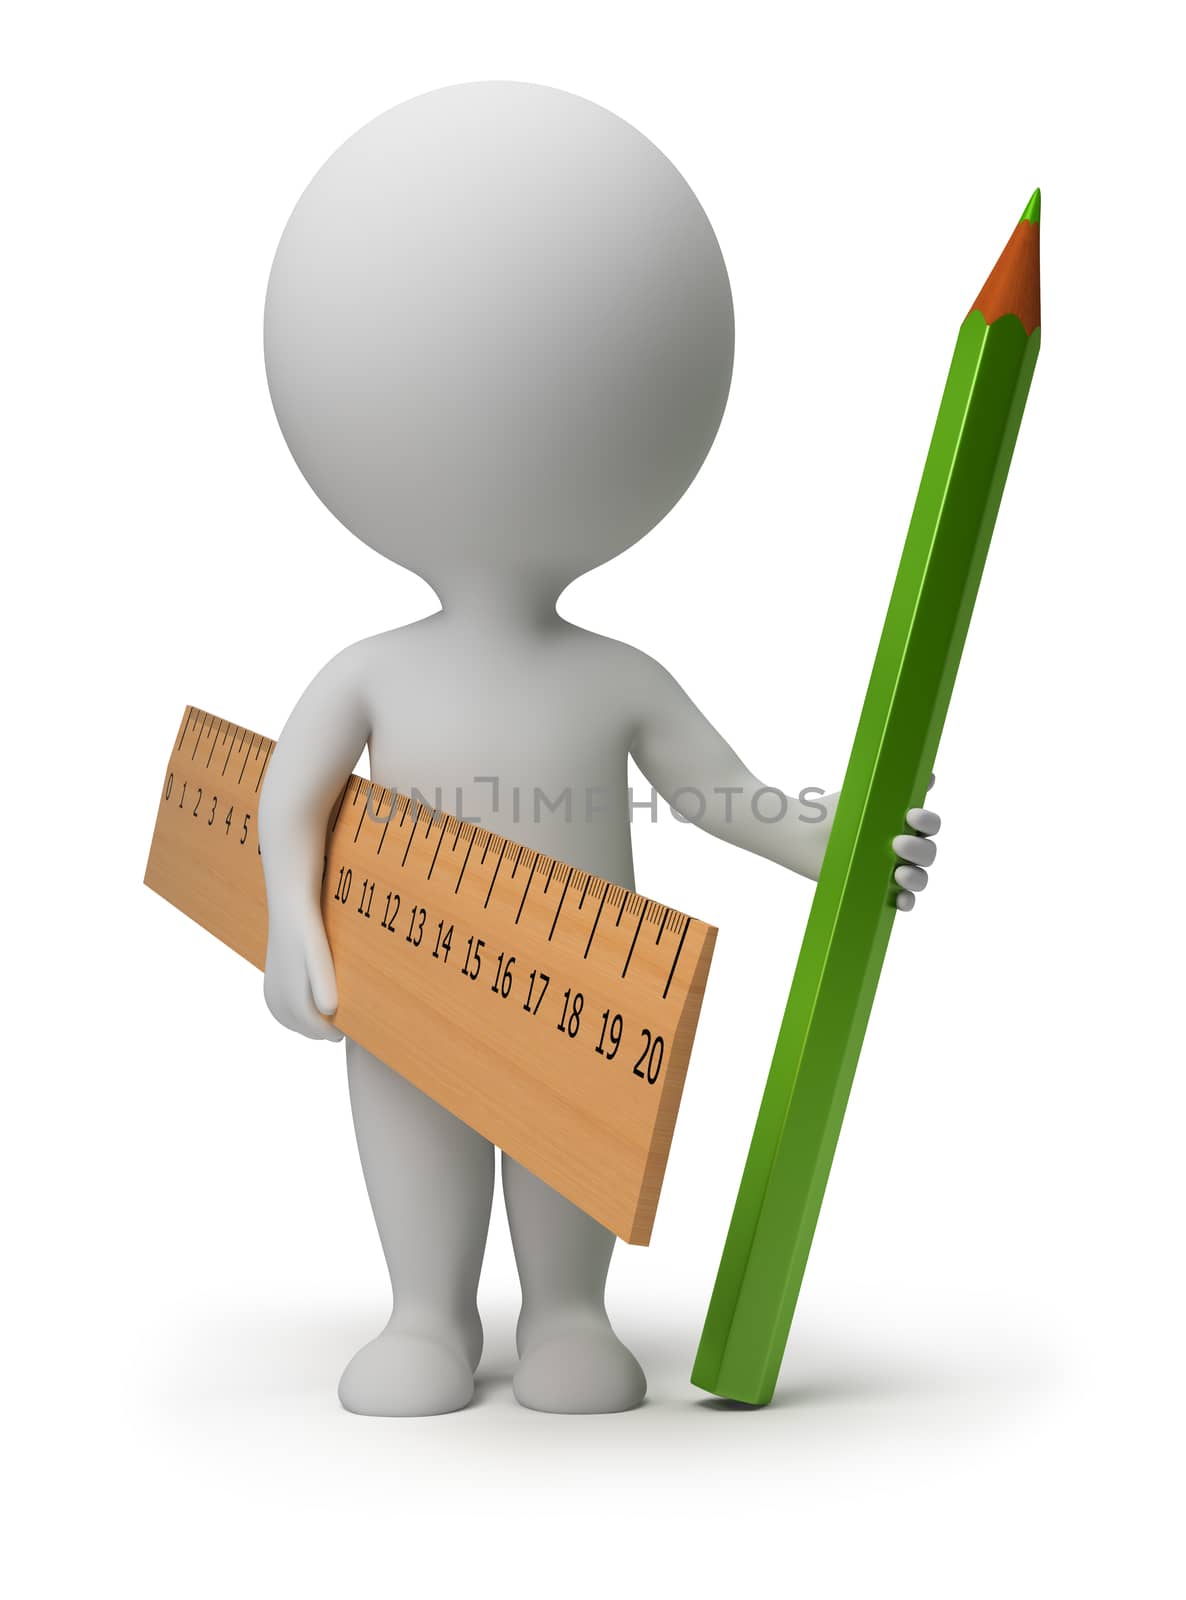 3d small person with a ruler and a green pencil. 3d image. Isolated white background.